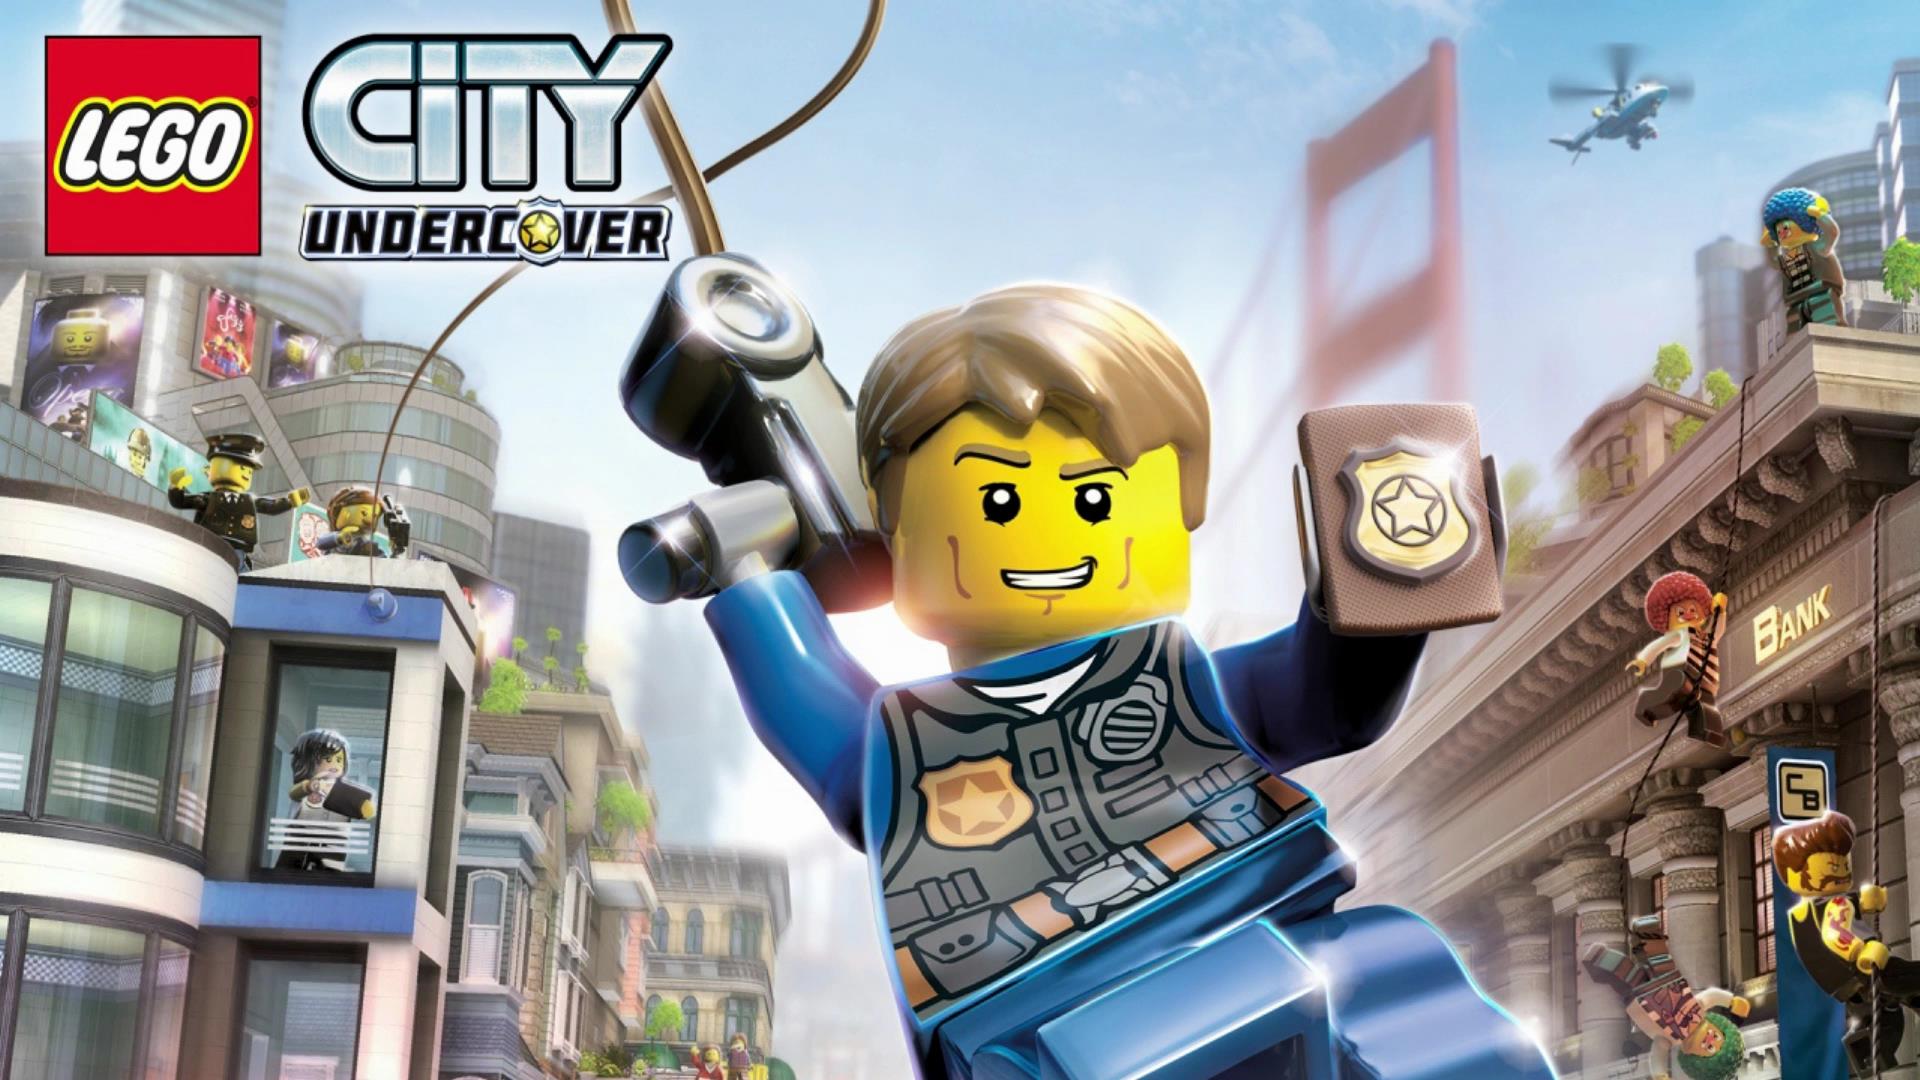 Lego City Undercover Runs Almost As Well On Switch As On PS4